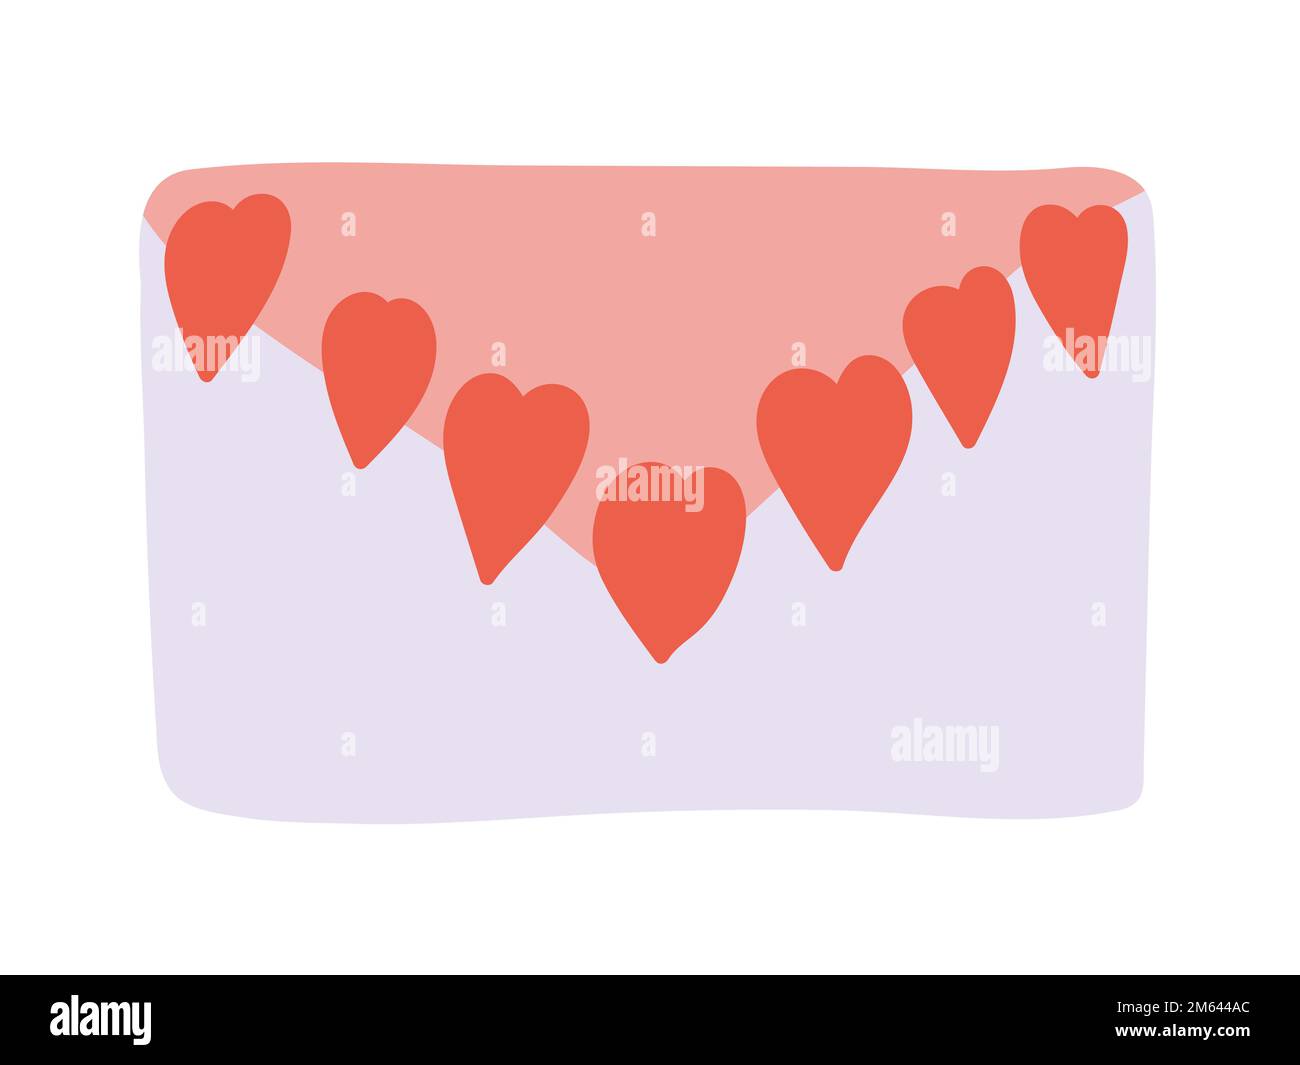 Love envelope with red hearts Stock Vector